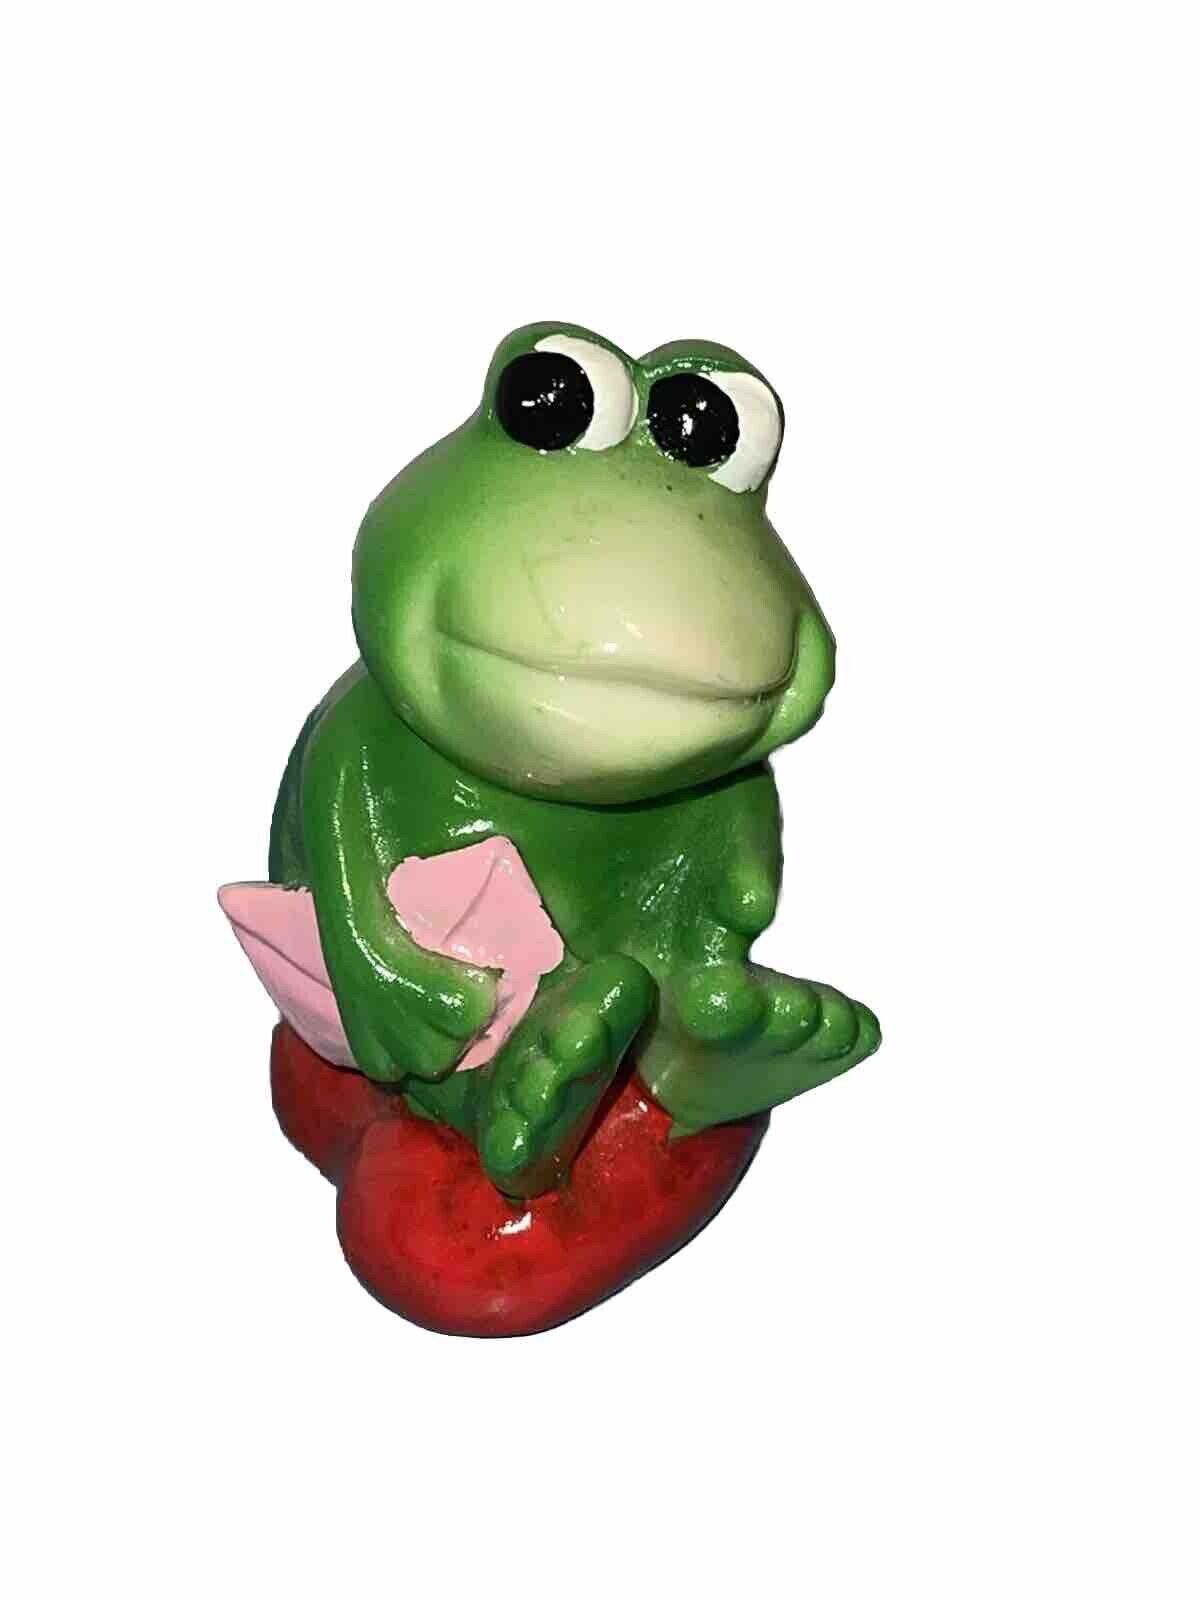 Cute Resin Frog Figurine Valentine’s Day Sitting On Heart With Envelope Fun